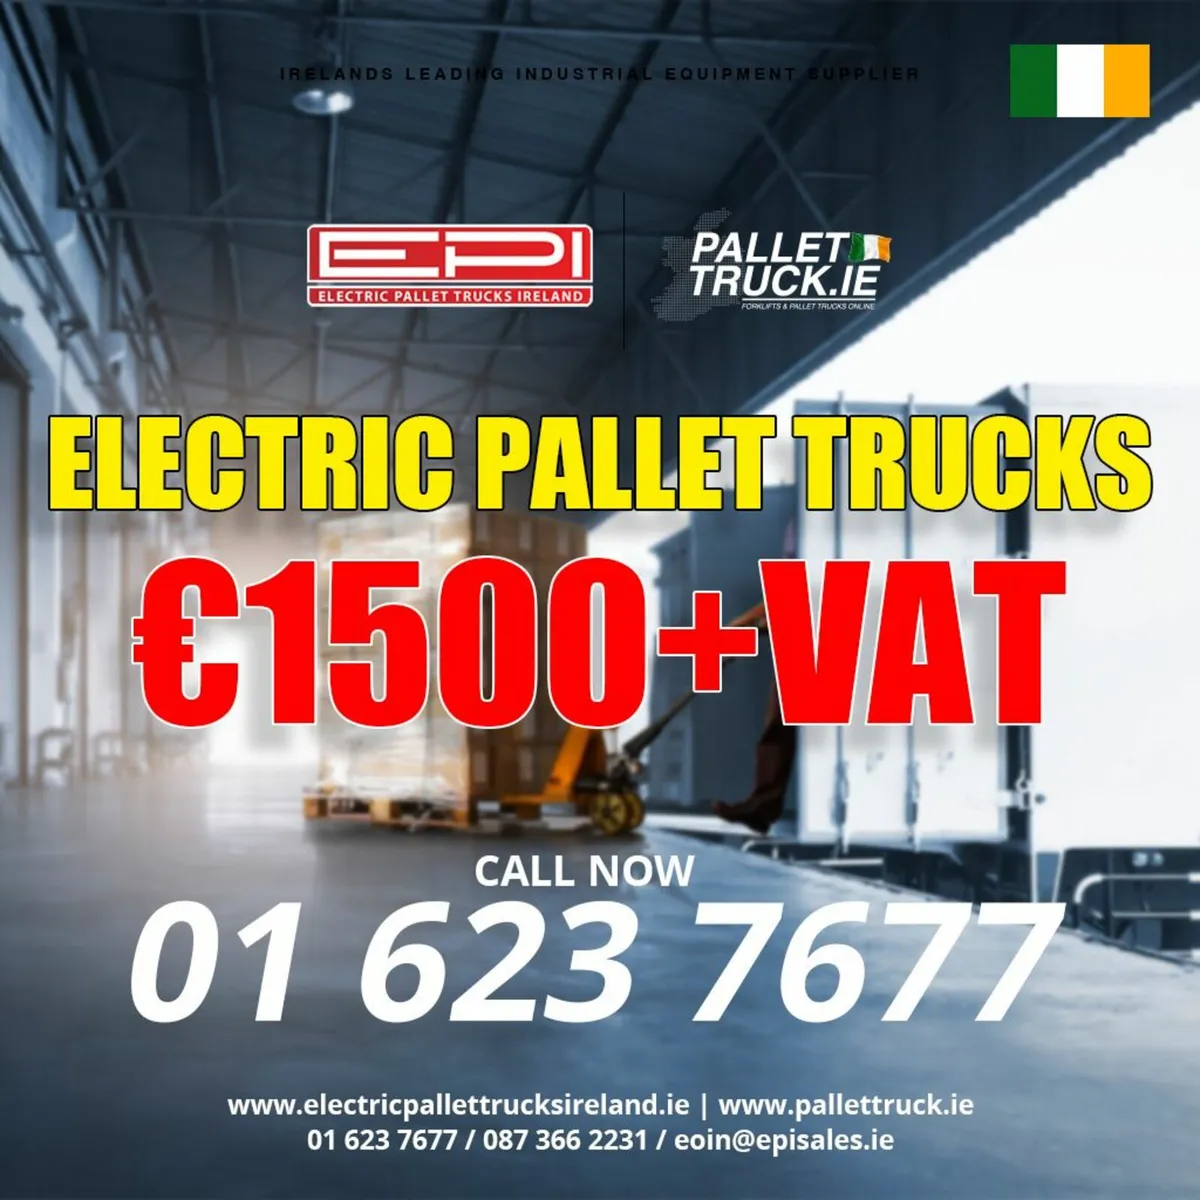 🇮🇪€1500 ELECTRIC PALLET TRUCK🇮🇪